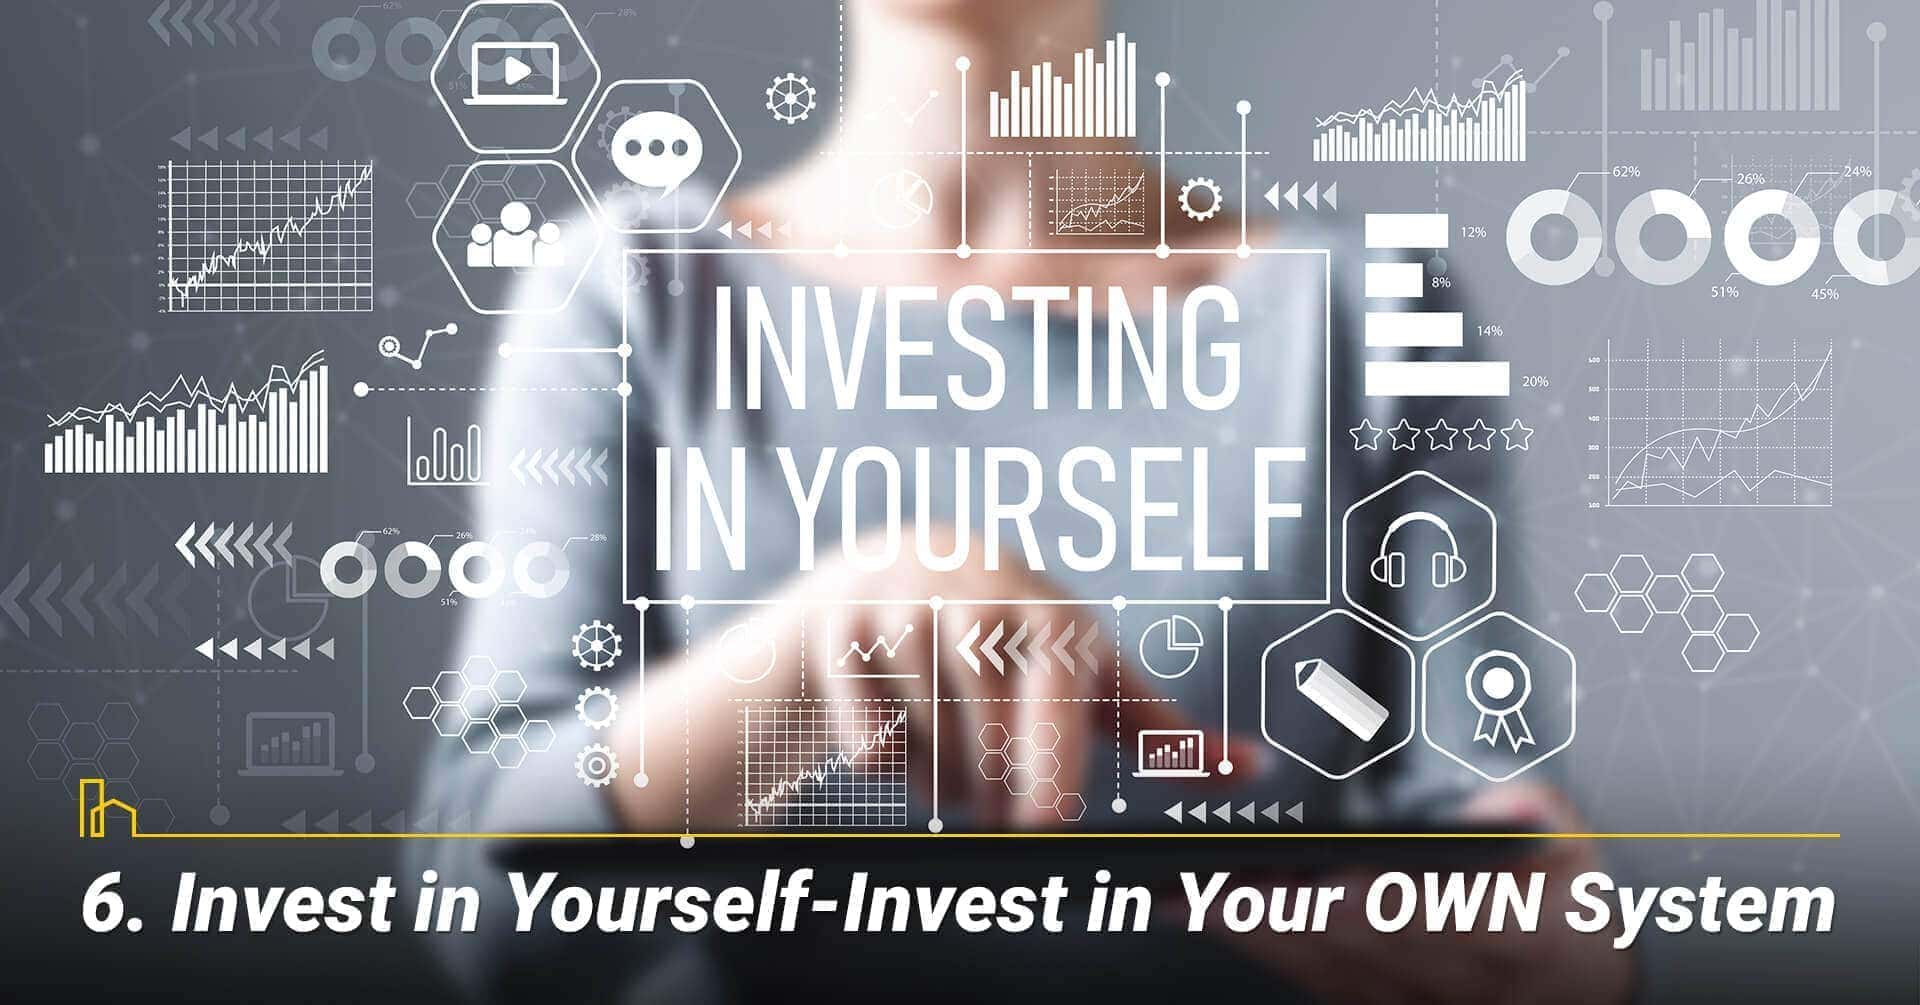 Invest in Yourself—Invest in Your OWN System, keep up with new technologies